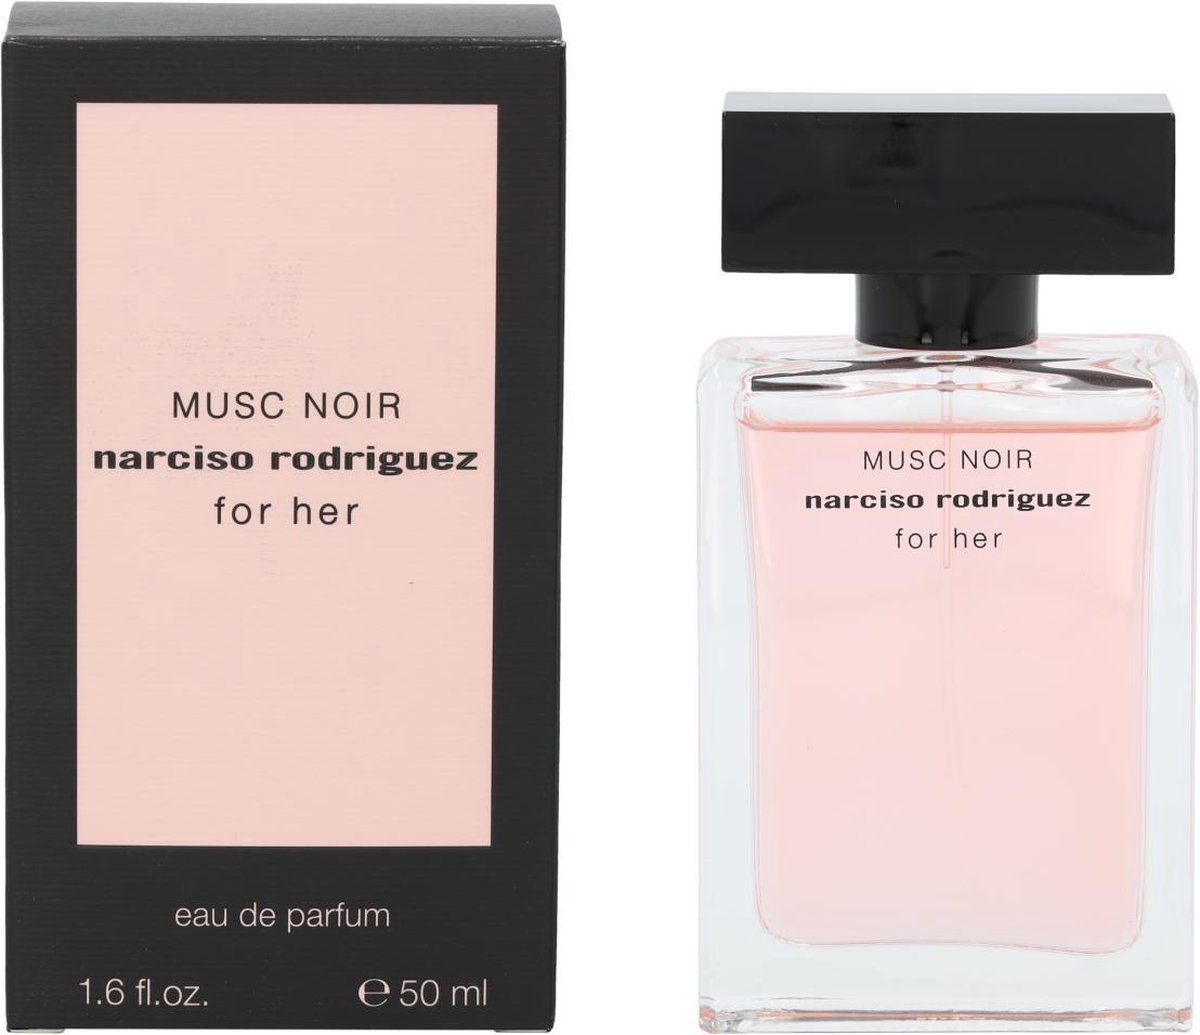 Narciso rodriguez musc noir rose. (Narciso Rodriguez) for her Musc Noir парфюмерная вода 100мл тестер. For her Musc Noir Rose перевод.